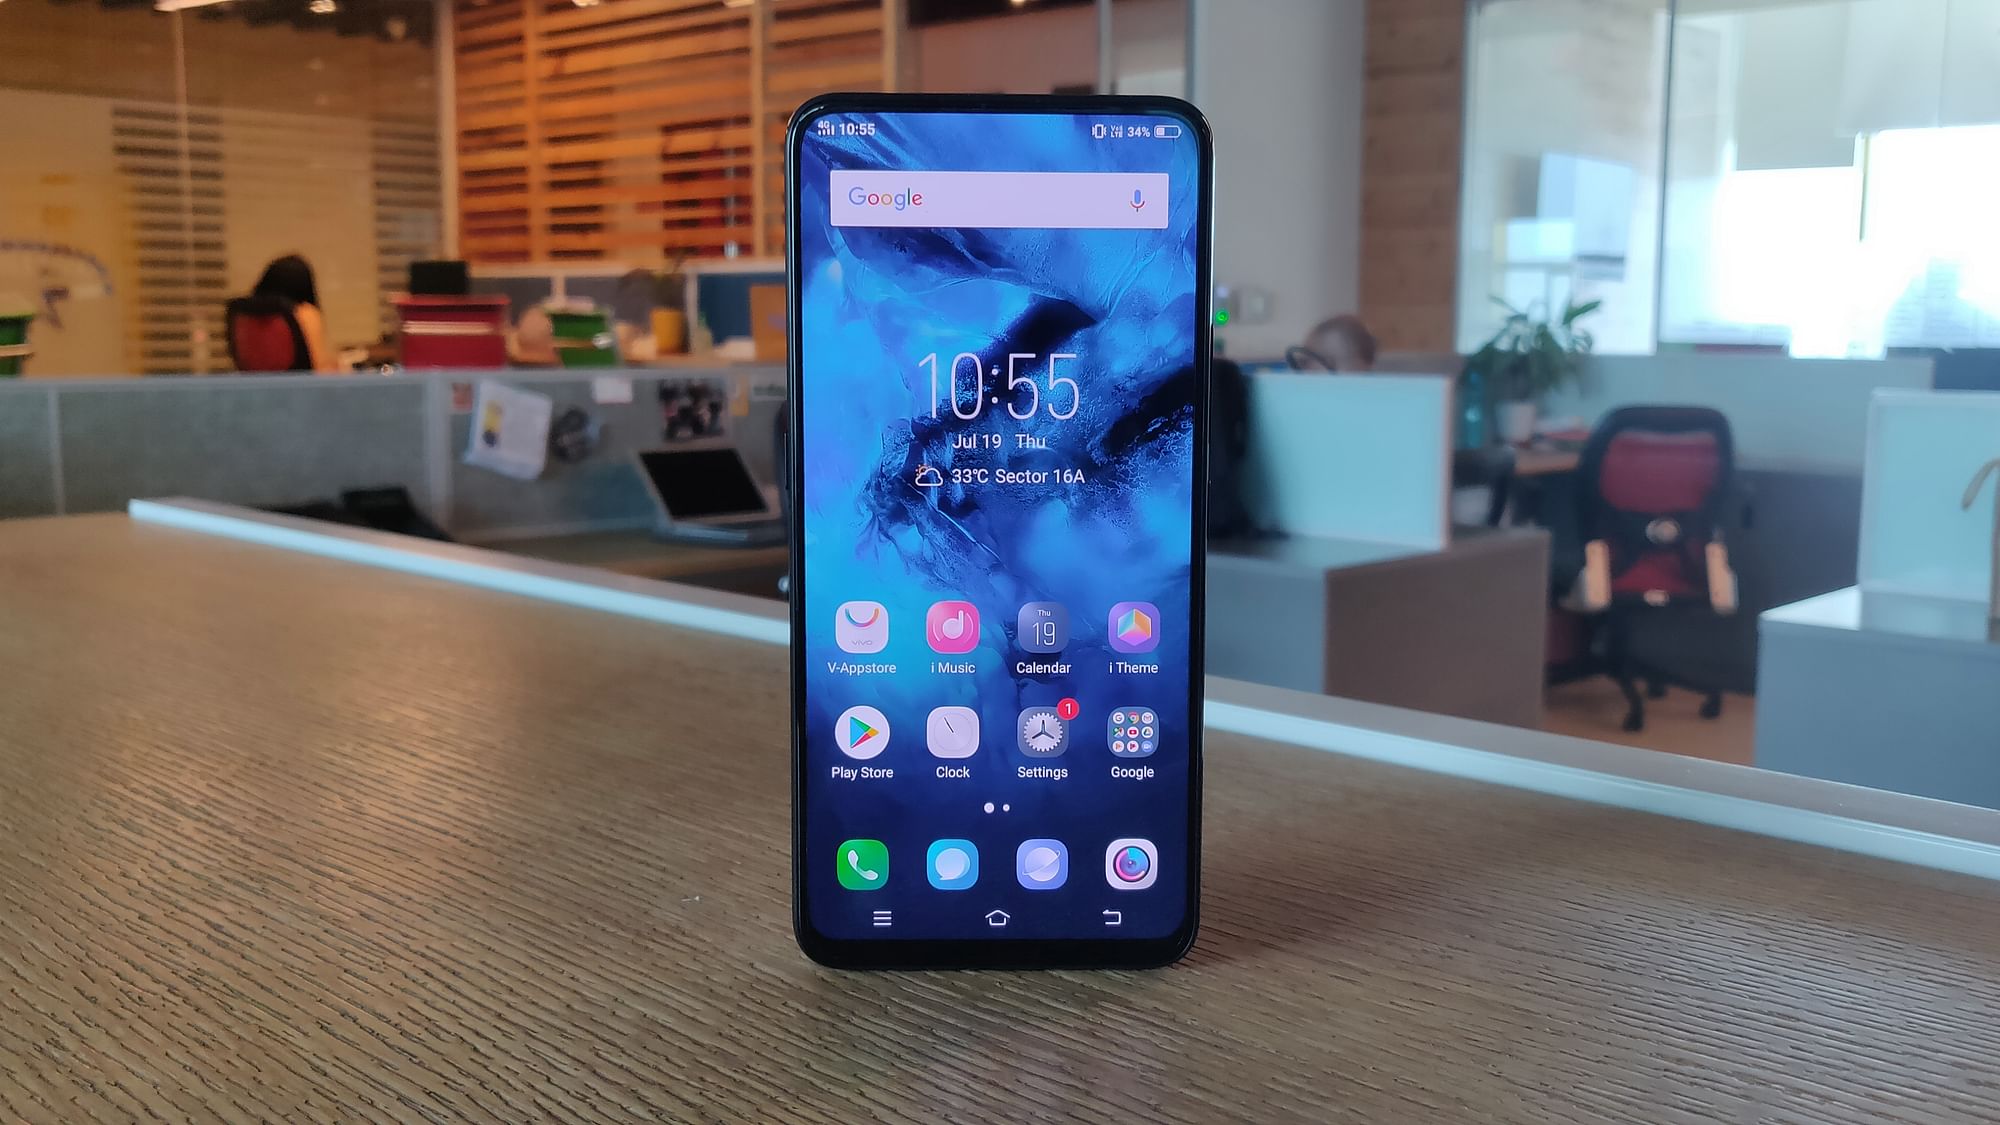 The Vivo Nex comes with a 6.59-inch full HD+ bezel-less display with an in-display fingerprint sensor and powerful internal hardware including a Snapdragon 845 processor, 8 GB RAM and 128 GB on-board storage.